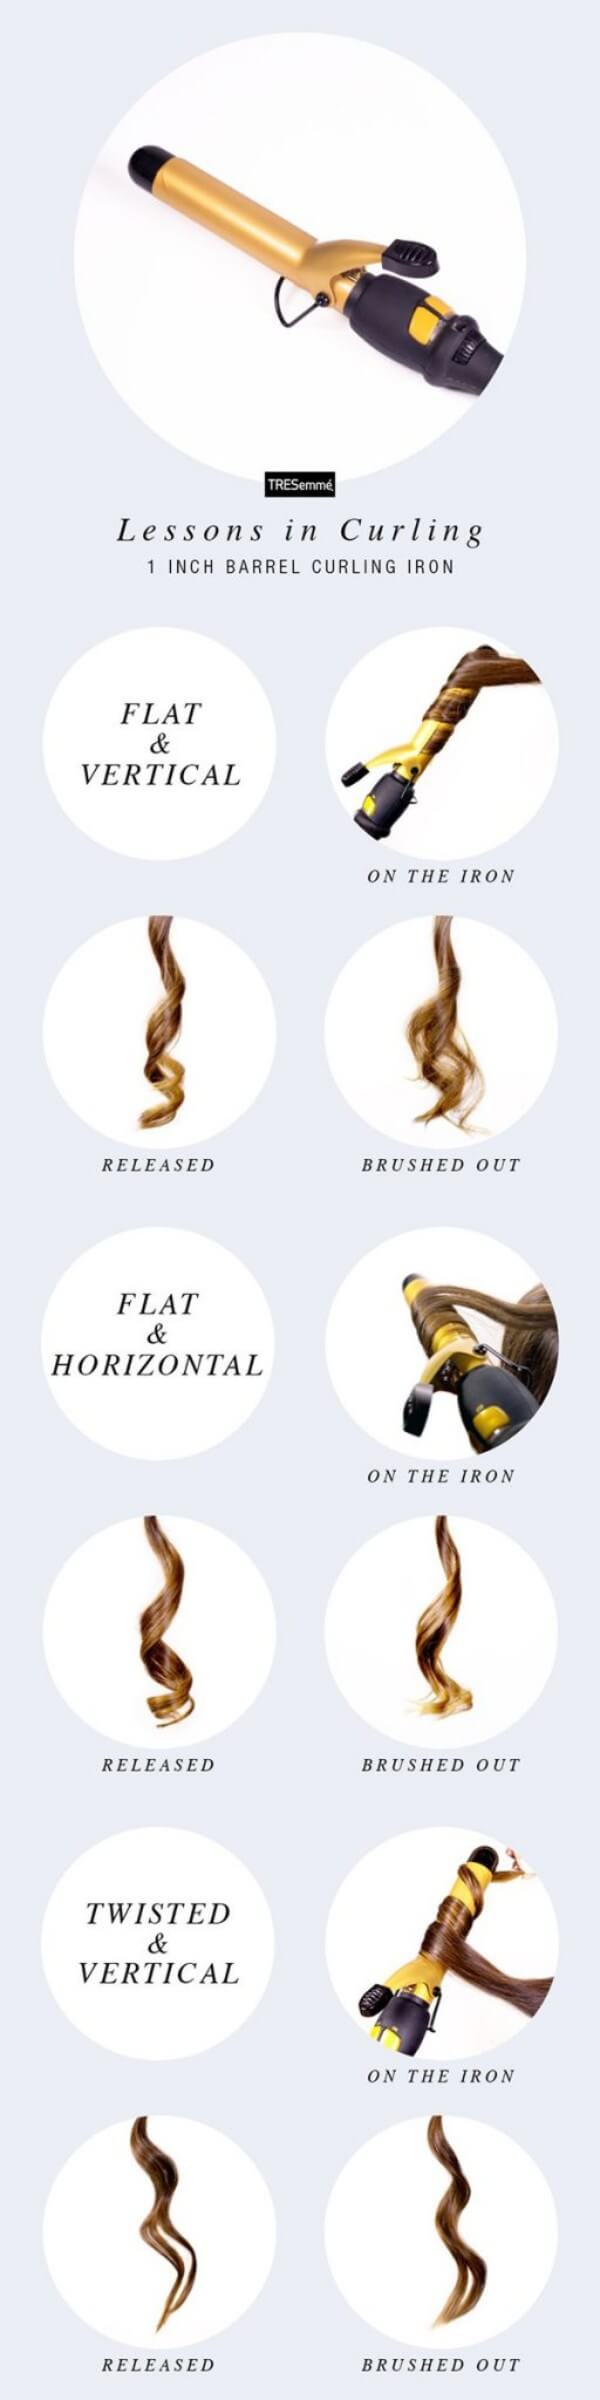 How To Make Curls With Curling Iron Ways to Curl Your Hairs: Step by Step Guide